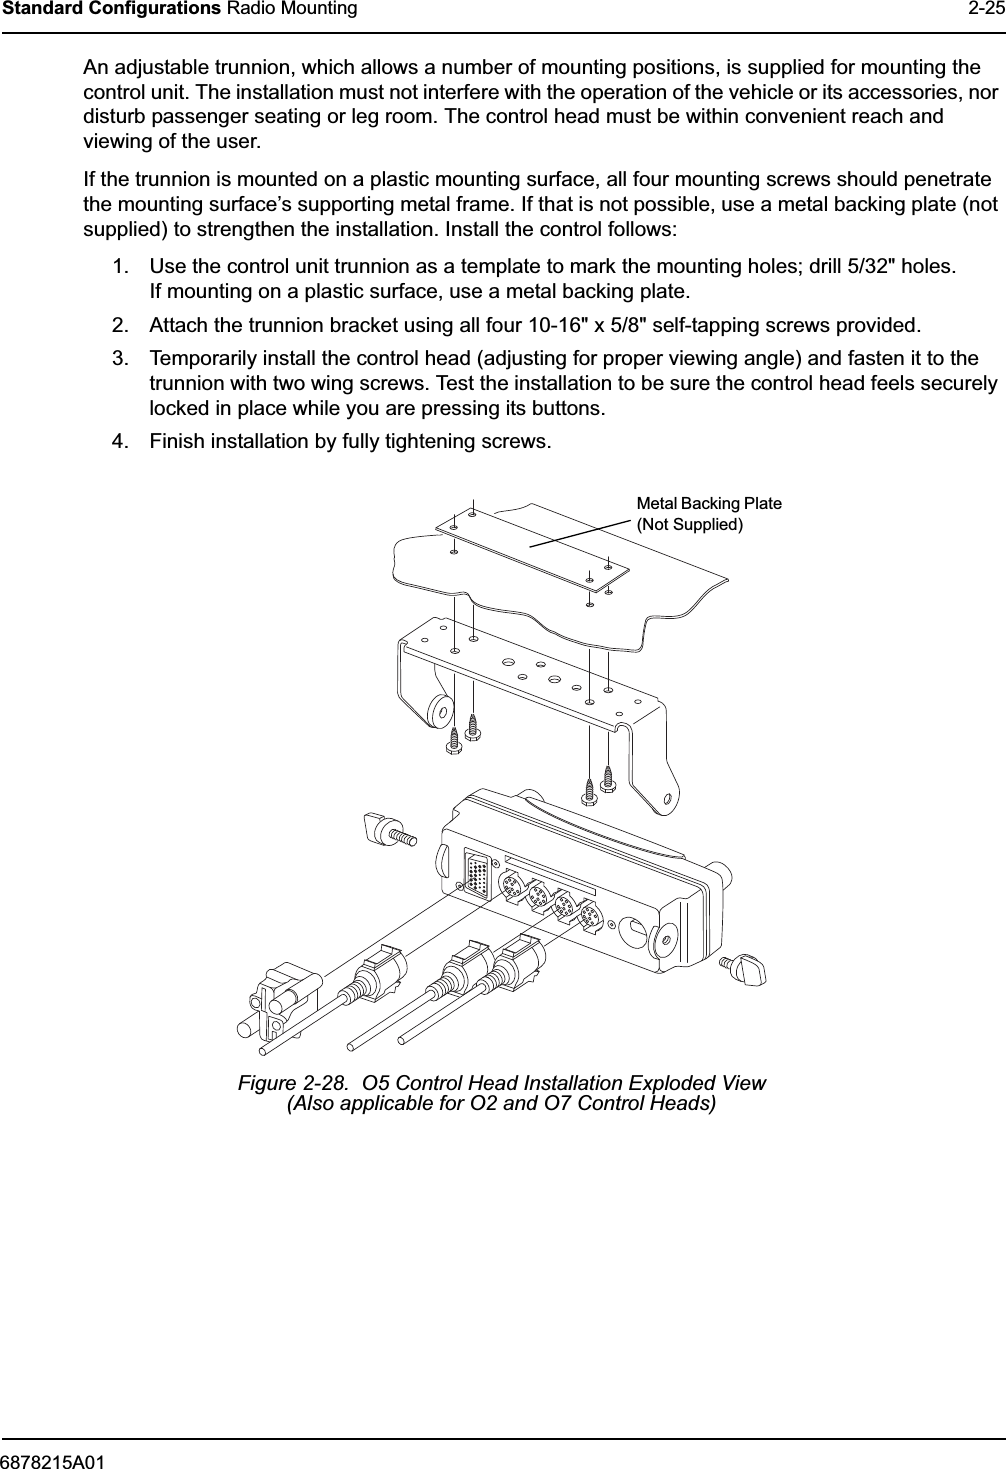 6878215A01Standard Configurations Radio Mounting 2-25An adjustable trunnion, which allows a number of mounting positions, is supplied for mounting the control unit. The installation must not interfere with the operation of the vehicle or its accessories, nor disturb passenger seating or leg room. The control head must be within convenient reach and viewing of the user.If the trunnion is mounted on a plastic mounting surface, all four mounting screws should penetrate the mounting surface’s supporting metal frame. If that is not possible, use a metal backing plate (not supplied) to strengthen the installation. Install the control follows:1. Use the control unit trunnion as a template to mark the mounting holes; drill 5/32&quot; holes. If mounting on a plastic surface, use a metal backing plate.2. Attach the trunnion bracket using all four 10-16&quot; x 5/8&quot; self-tapping screws provided.3. Temporarily install the control head (adjusting for proper viewing angle) and fasten it to the trunnion with two wing screws. Test the installation to be sure the control head feels securely locked in place while you are pressing its buttons.4. Finish installation by fully tightening screws.Figure 2-28.  O5 Control Head Installation Exploded View (Also applicable for O2 and O7 Control Heads)Metal Backing Plate (Not Supplied)